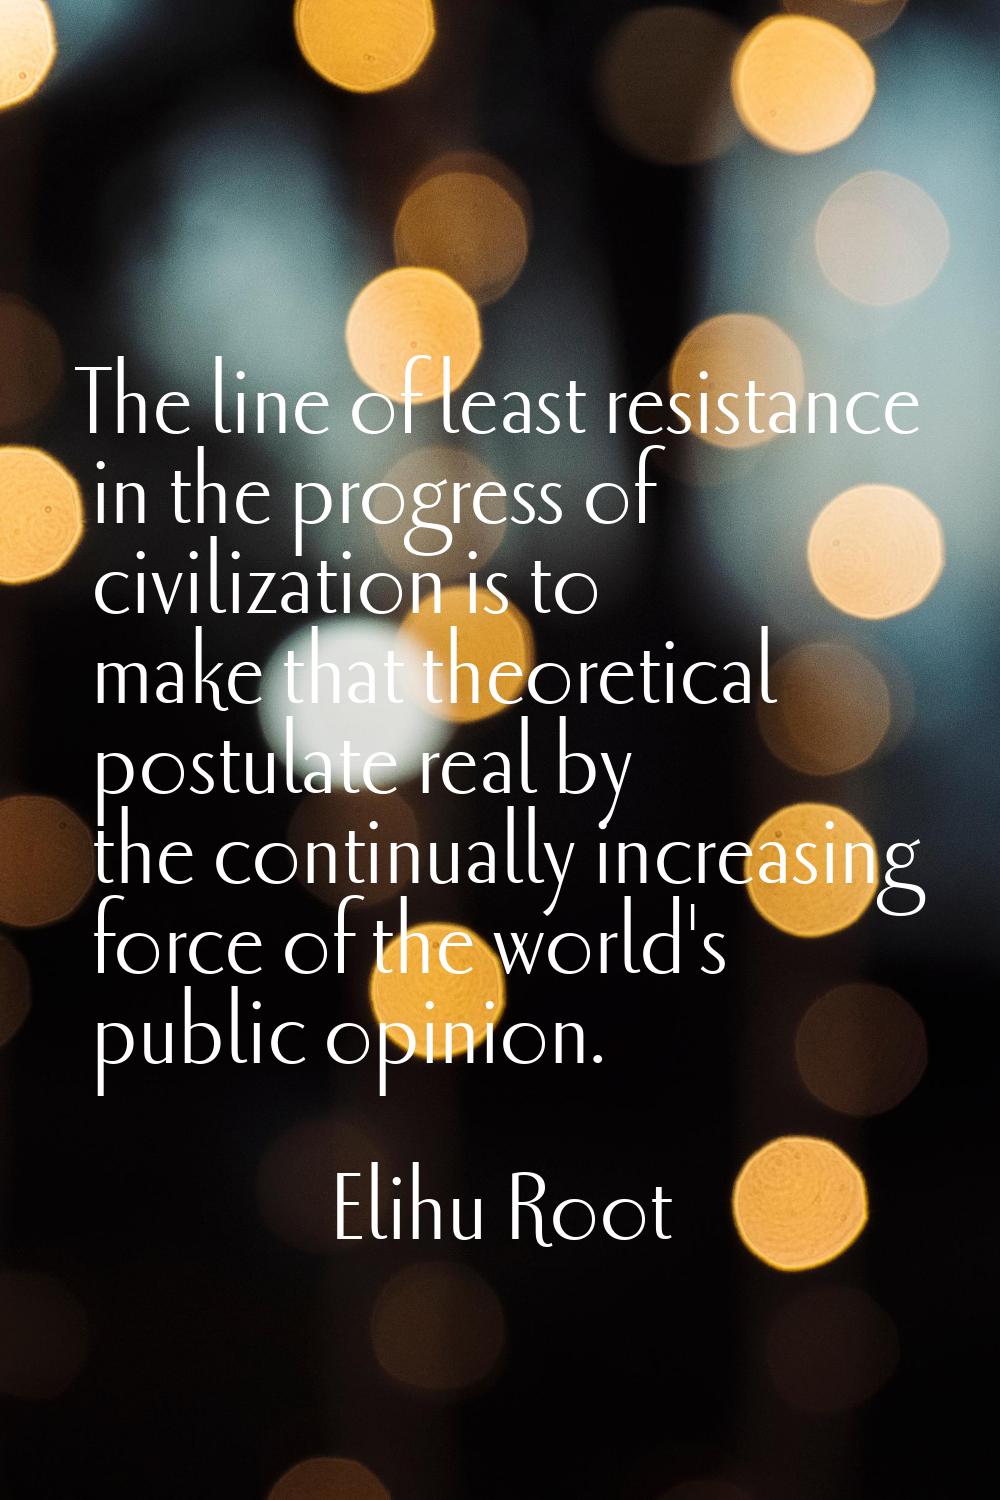 The line of least resistance in the progress of civilization is to make that theoretical postulate 